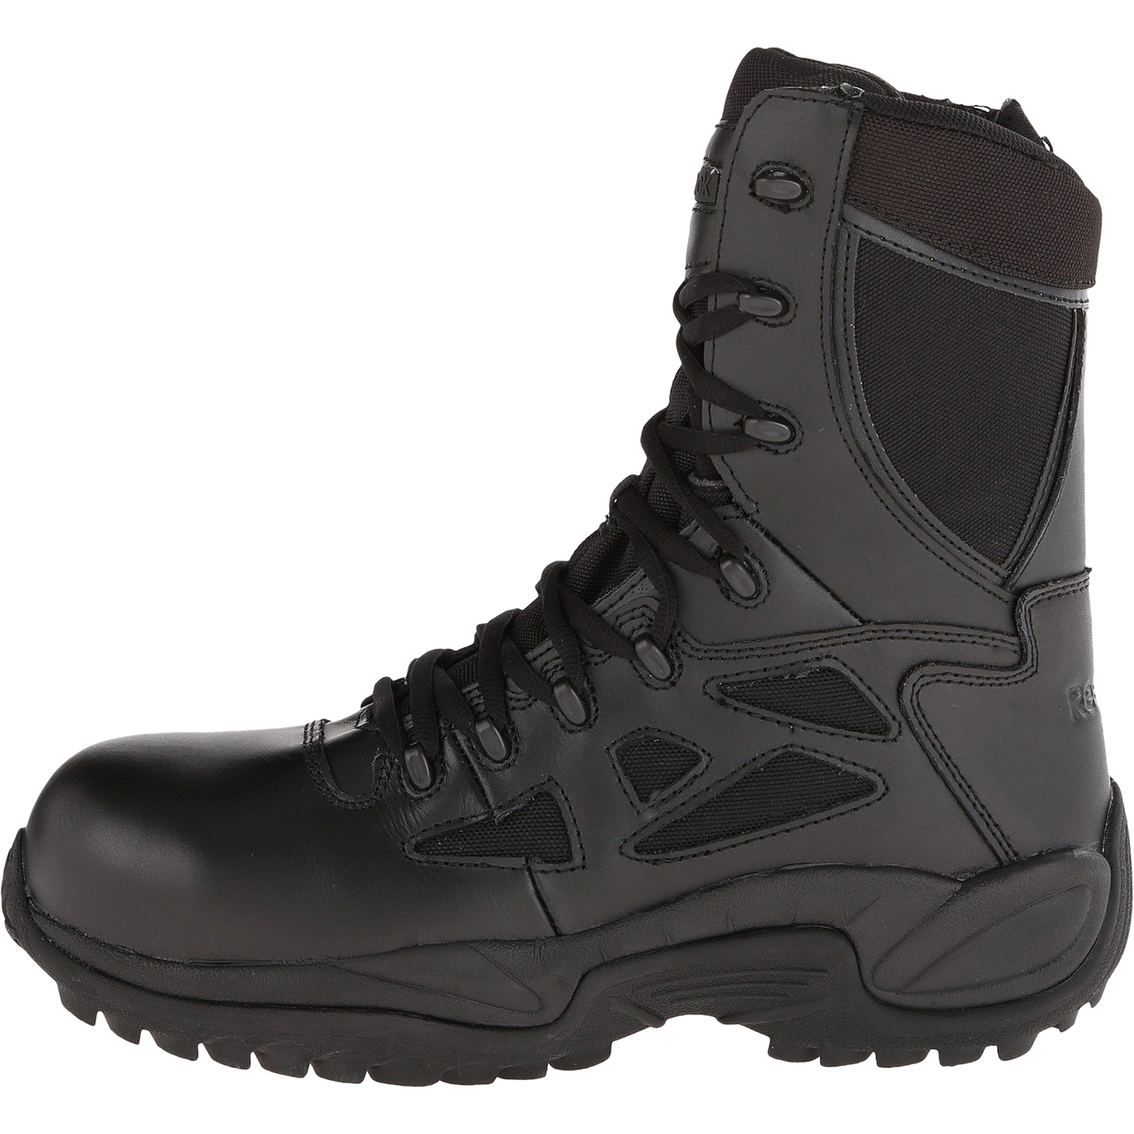 Reebok Rapid Response RB8874 Boots - Image 3 of 7